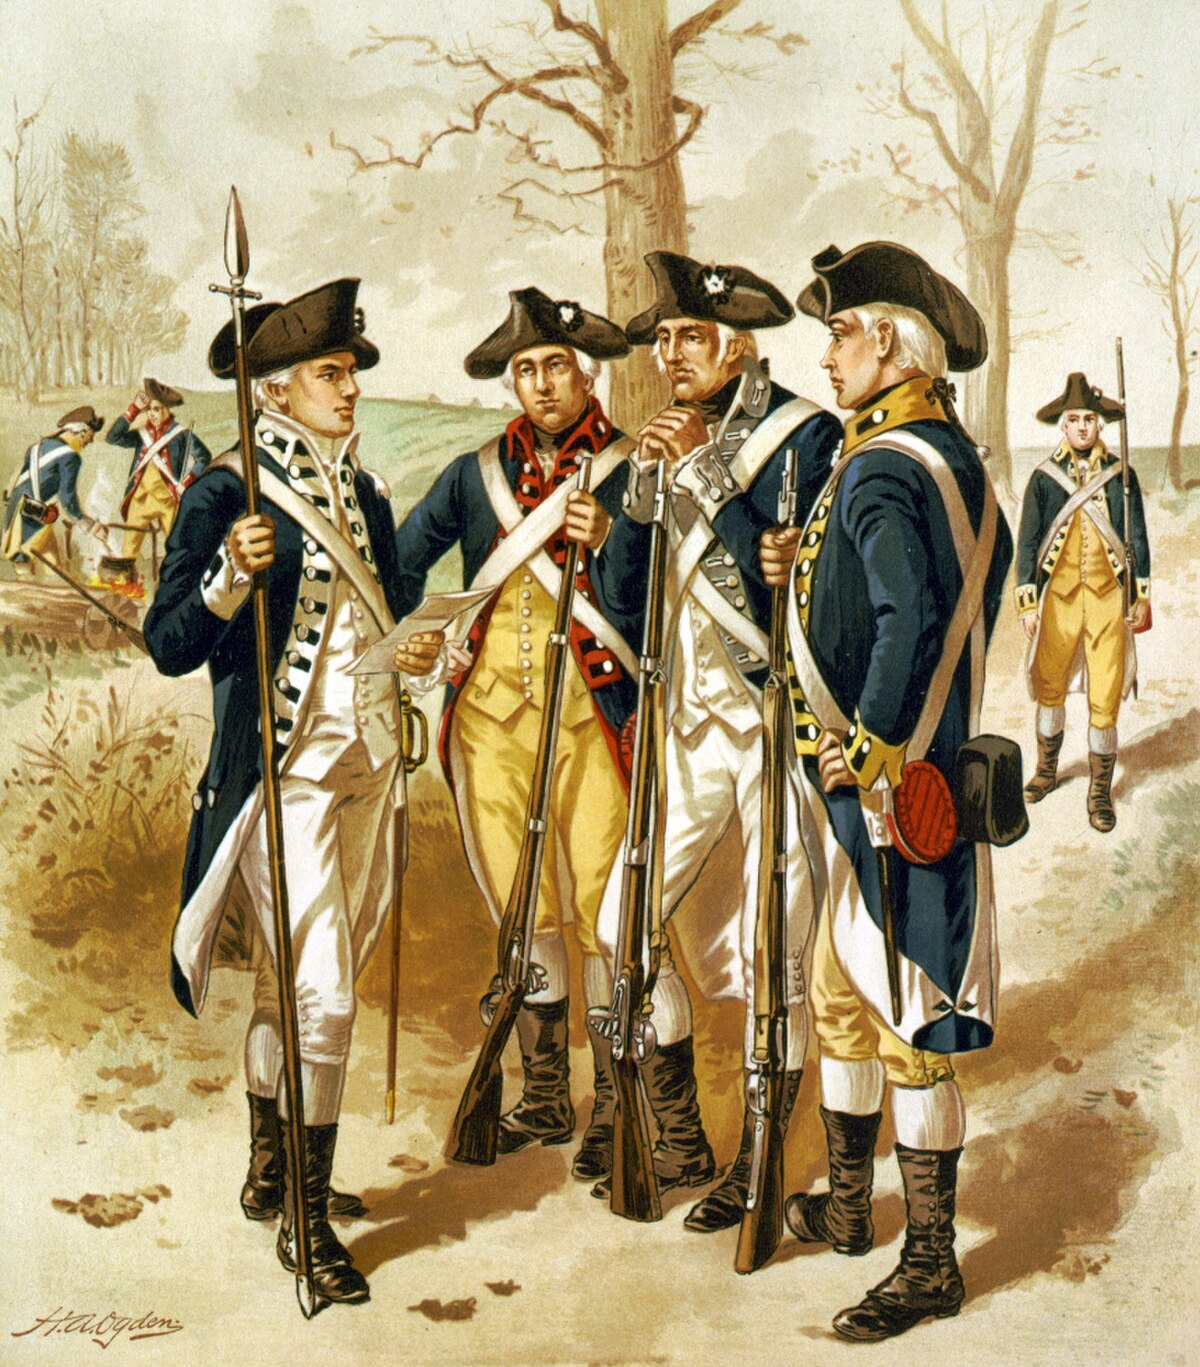 Commander-in-chief of the Continental Army